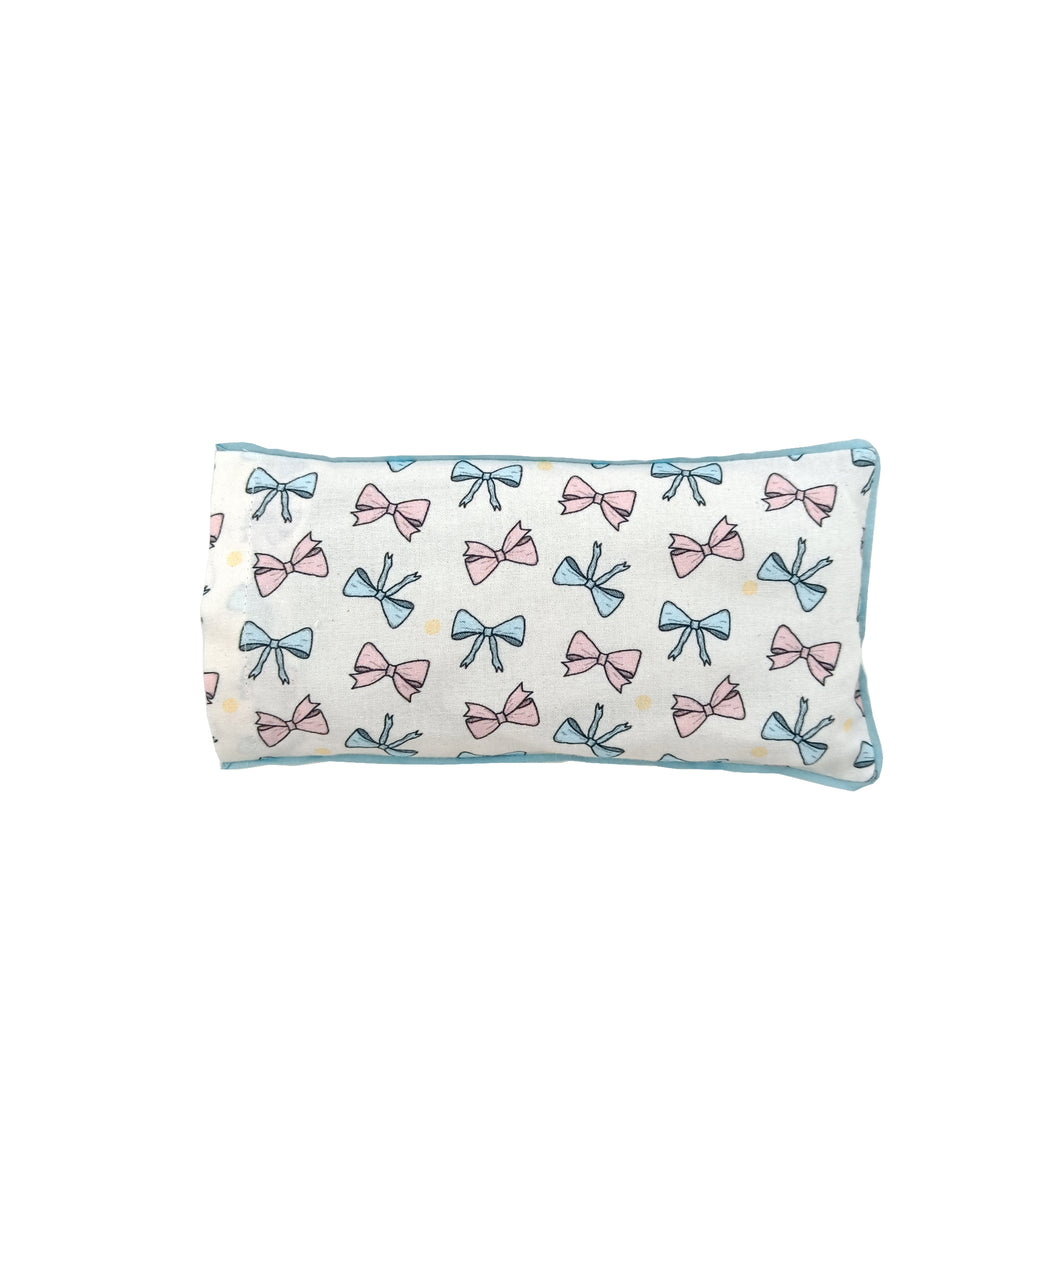 Eye Pillow Filled with Flaxseed - Bow printed Eye Pillow with piping